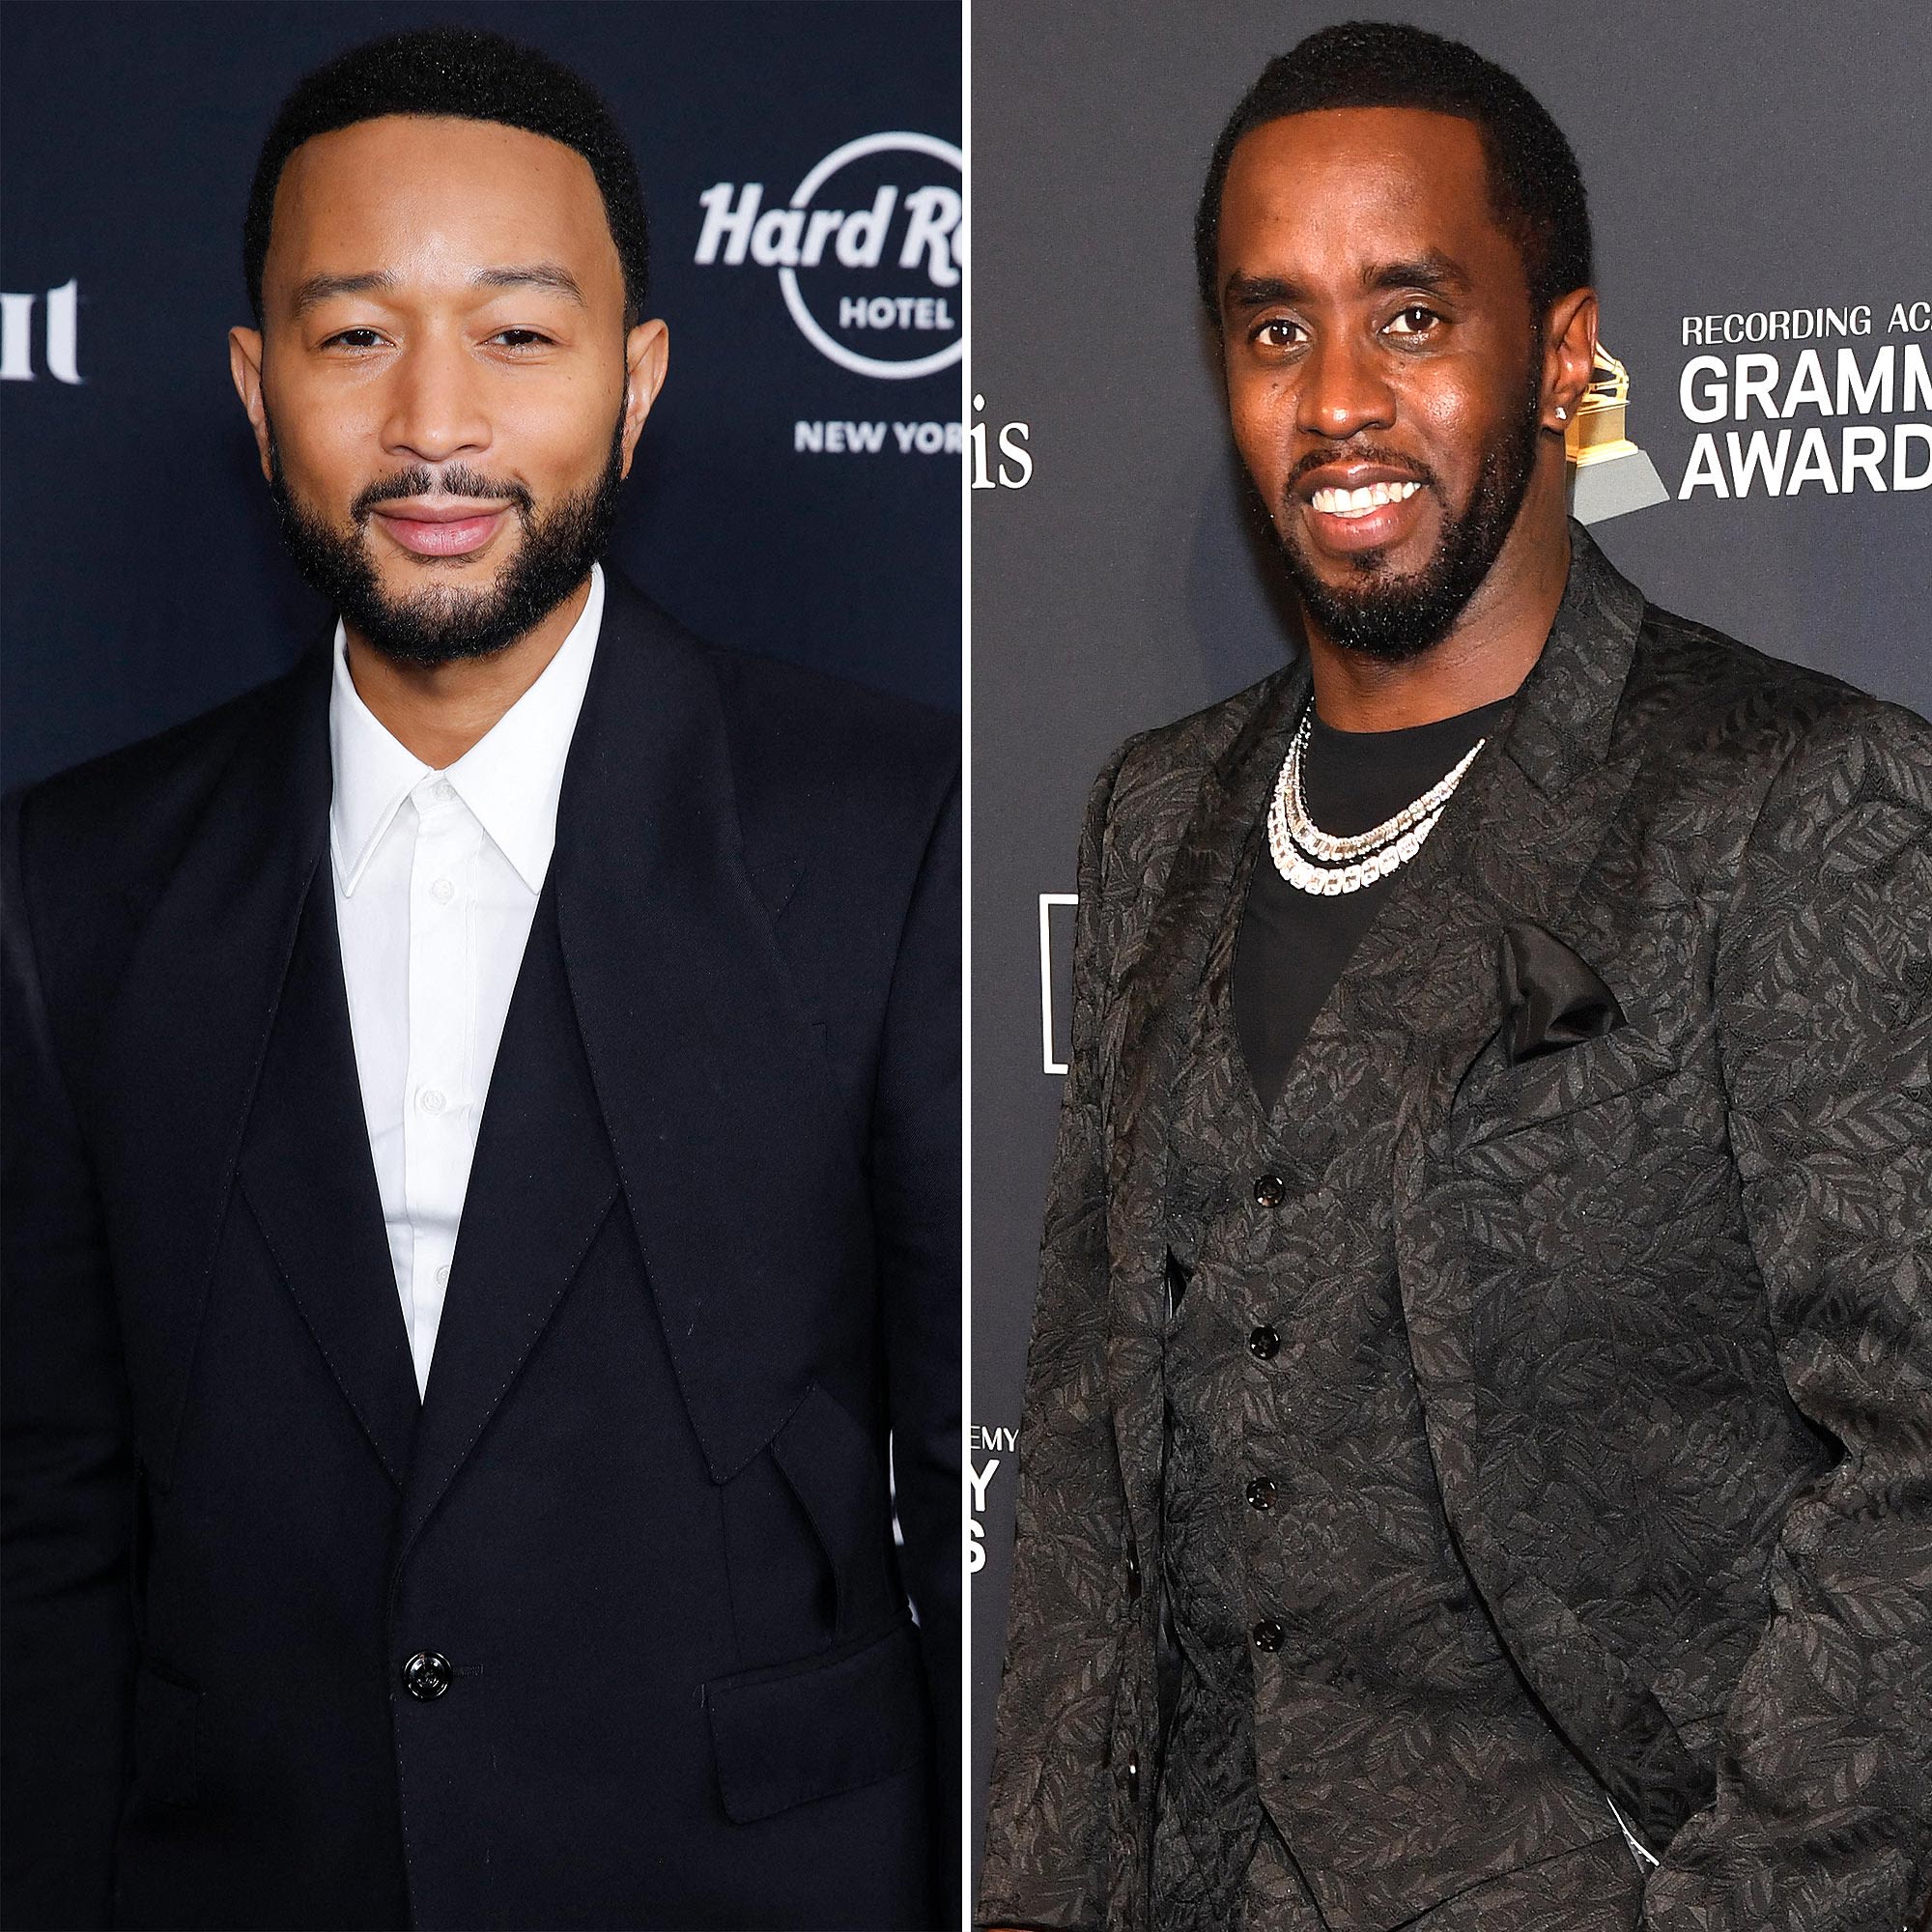 John Legend Says All Instances of Abuse Must Be ‘Brought to Light’ in Wake of Diddy Allegations